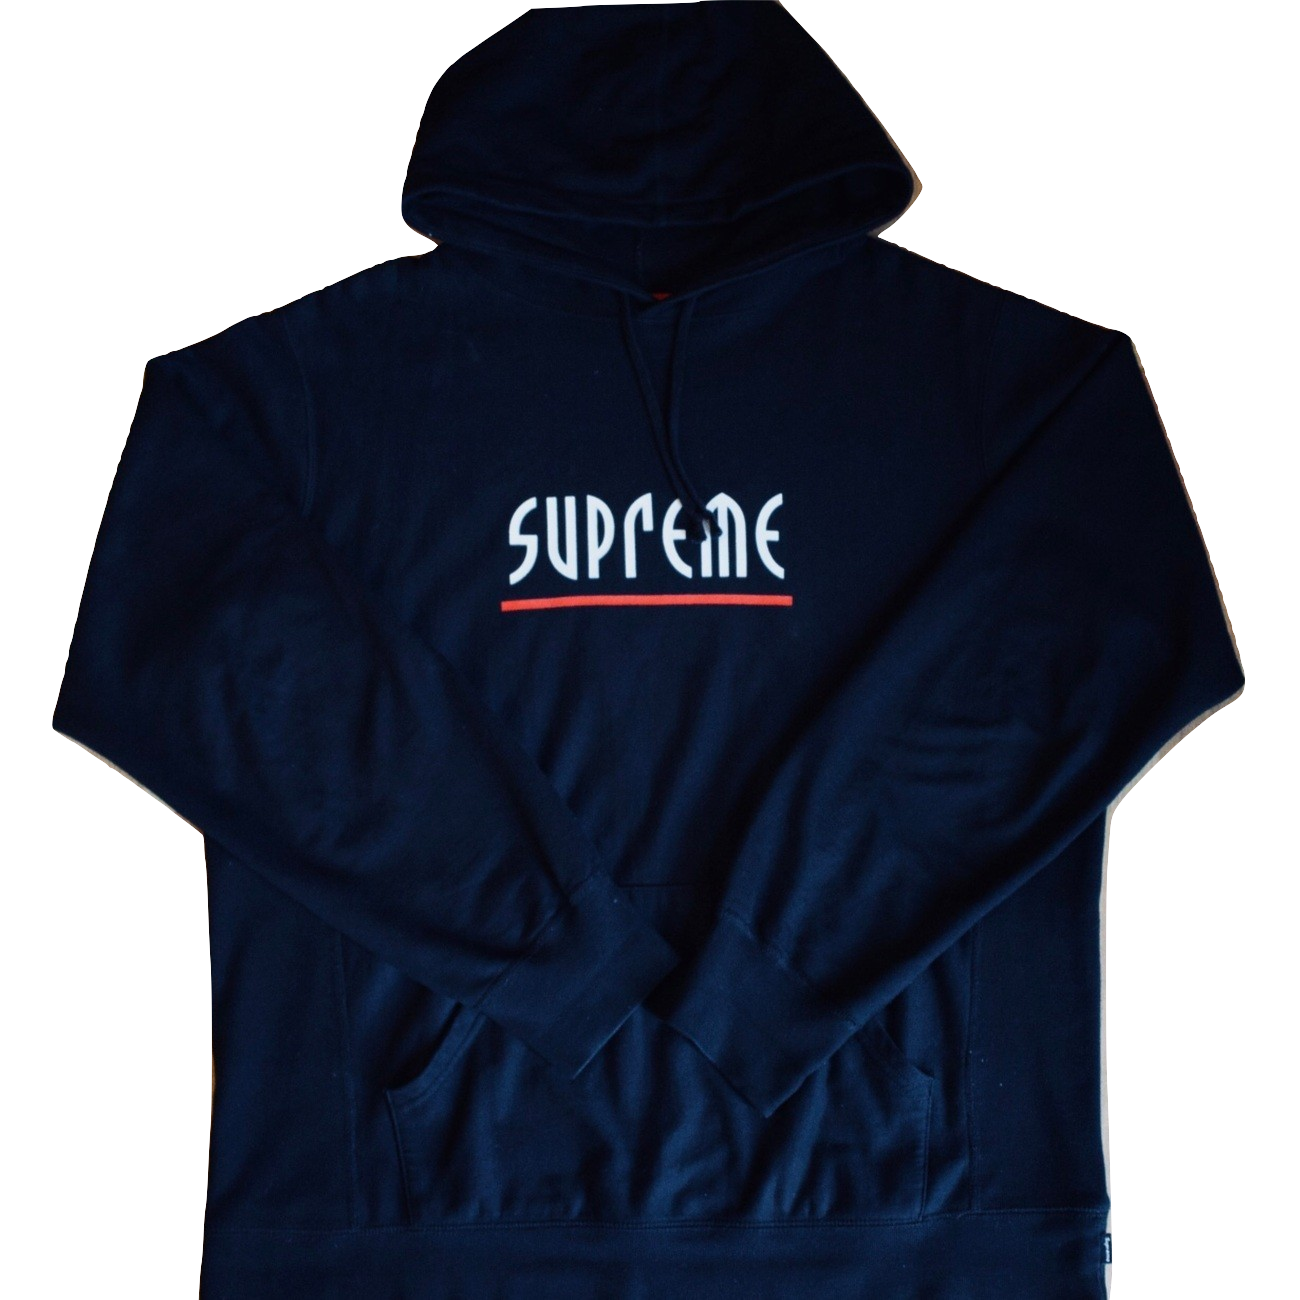 Supreme The Riot That Never Was Hooded Sweatshirt - Black - Used